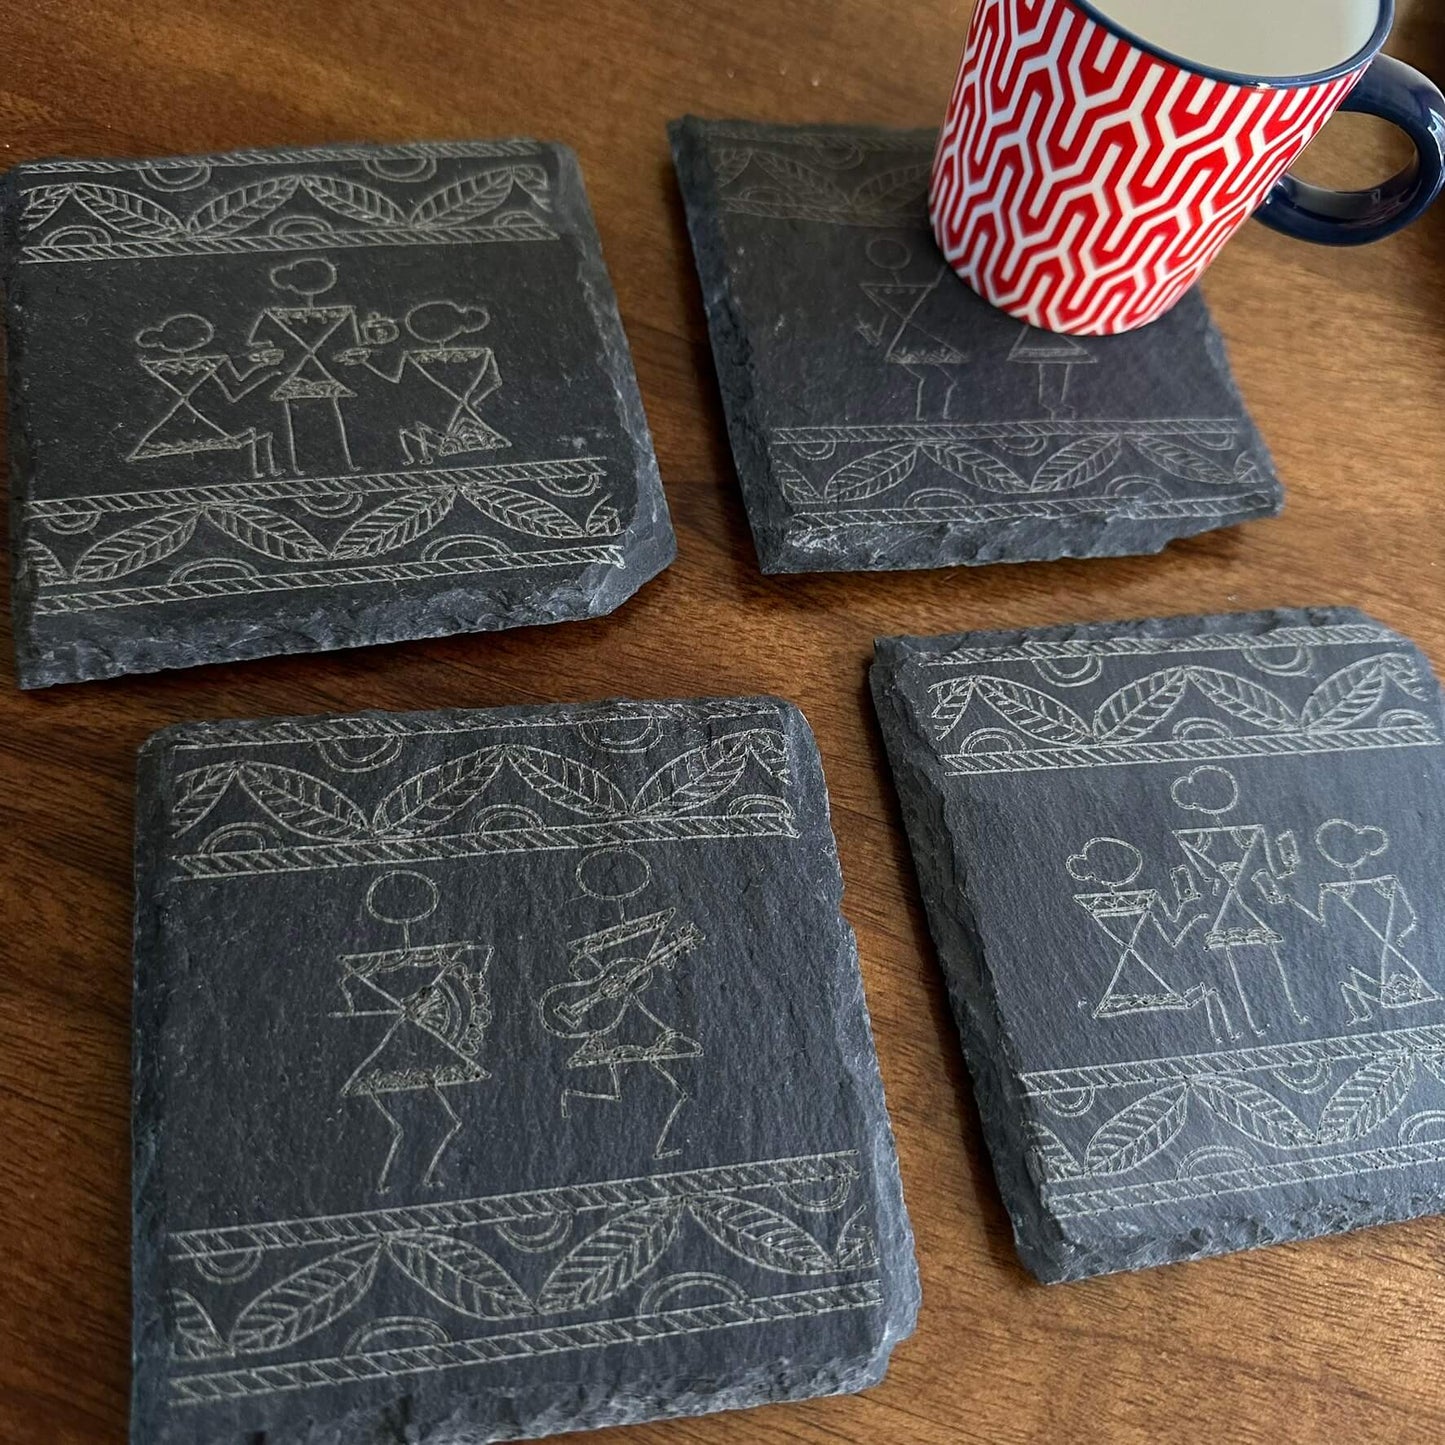 Modern Warli Art Slate Coasters - A day in Today's life